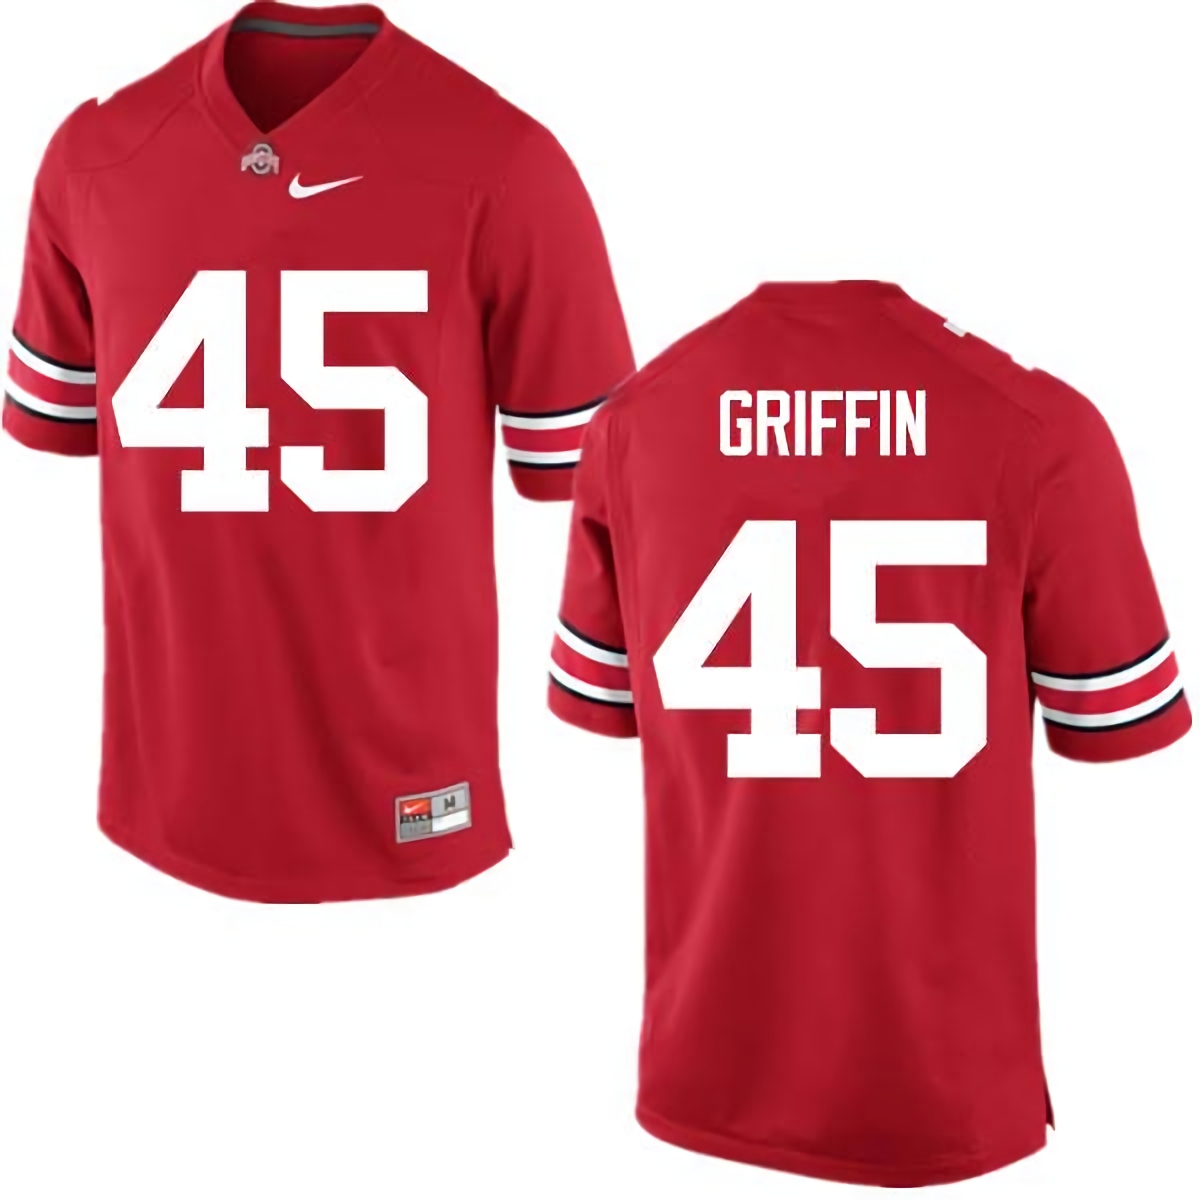 Archie Griffin Ohio State Buckeyes Men's NCAA #45 Nike Red College Stitched Football Jersey WMA8756JU